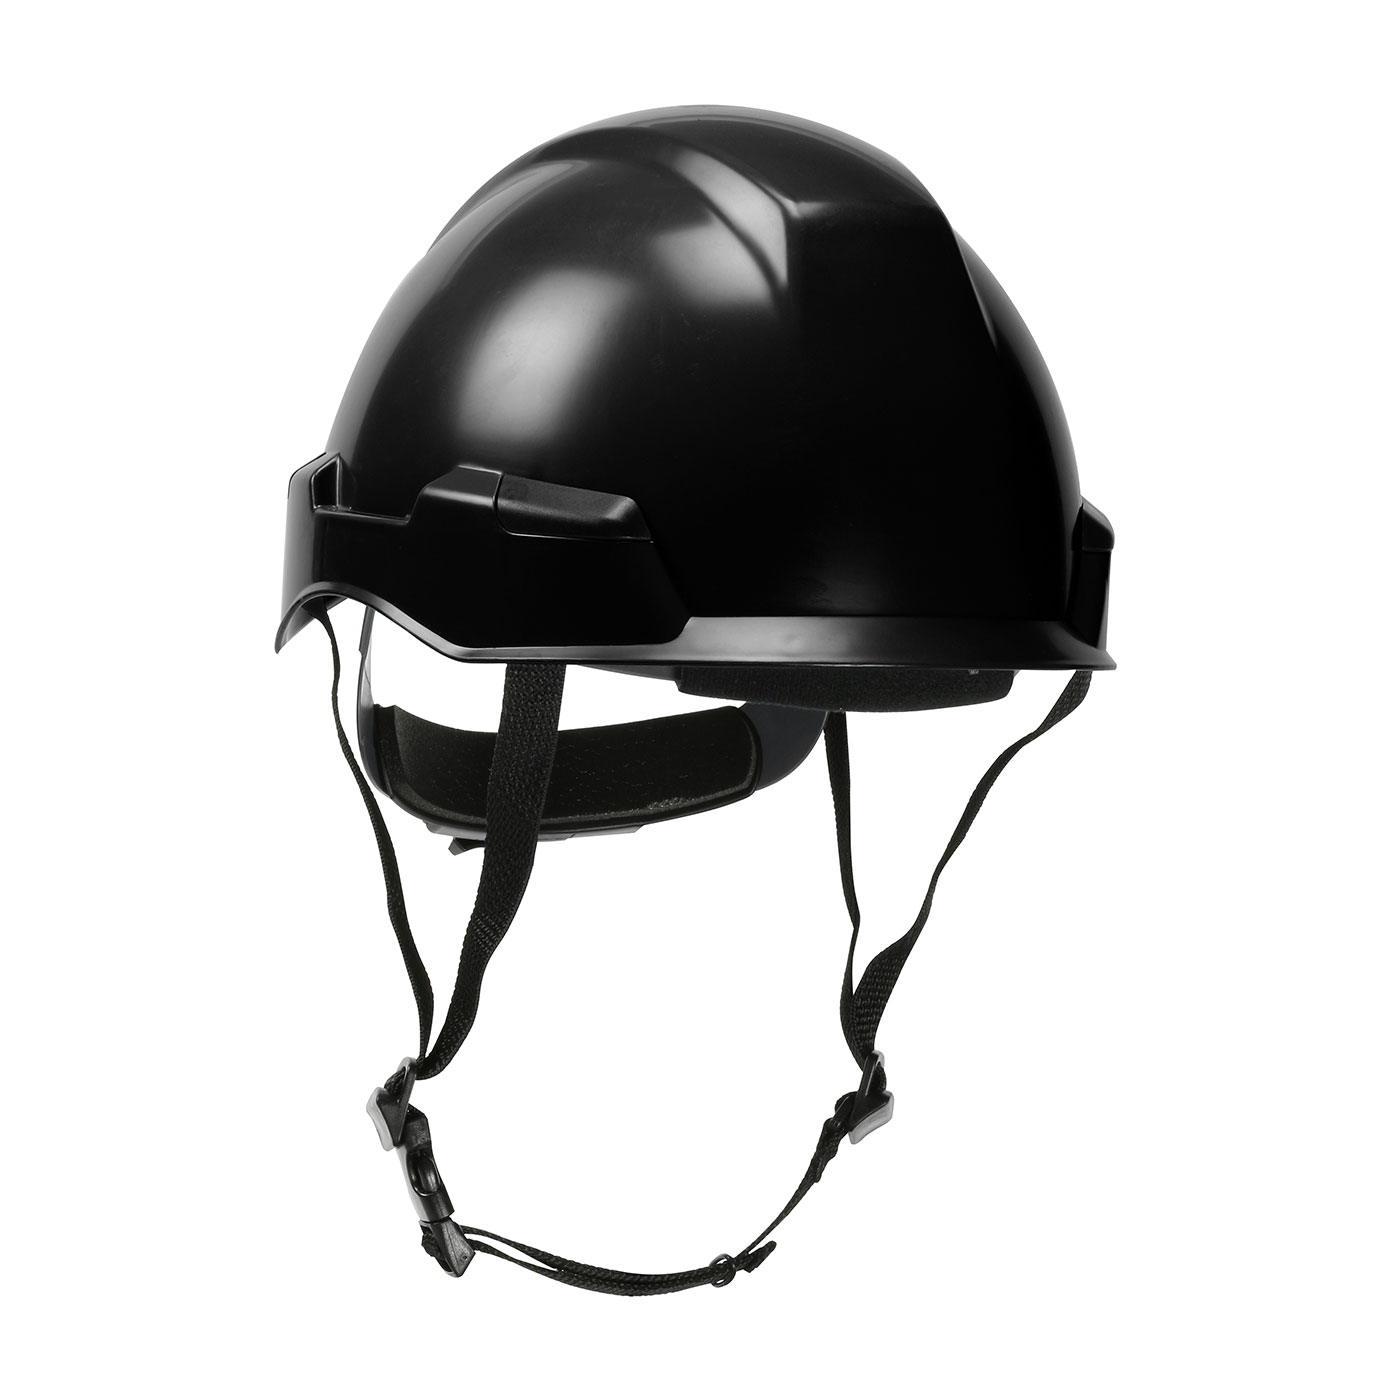 280-HP141R PIP® Dynamic Rocky™ Industrial Climbing Helmet with Polycarbonate / ABS Shell, Nylon Suspension, Wheel Ratchet Adjustment and 4-Point Chin Strap- Black